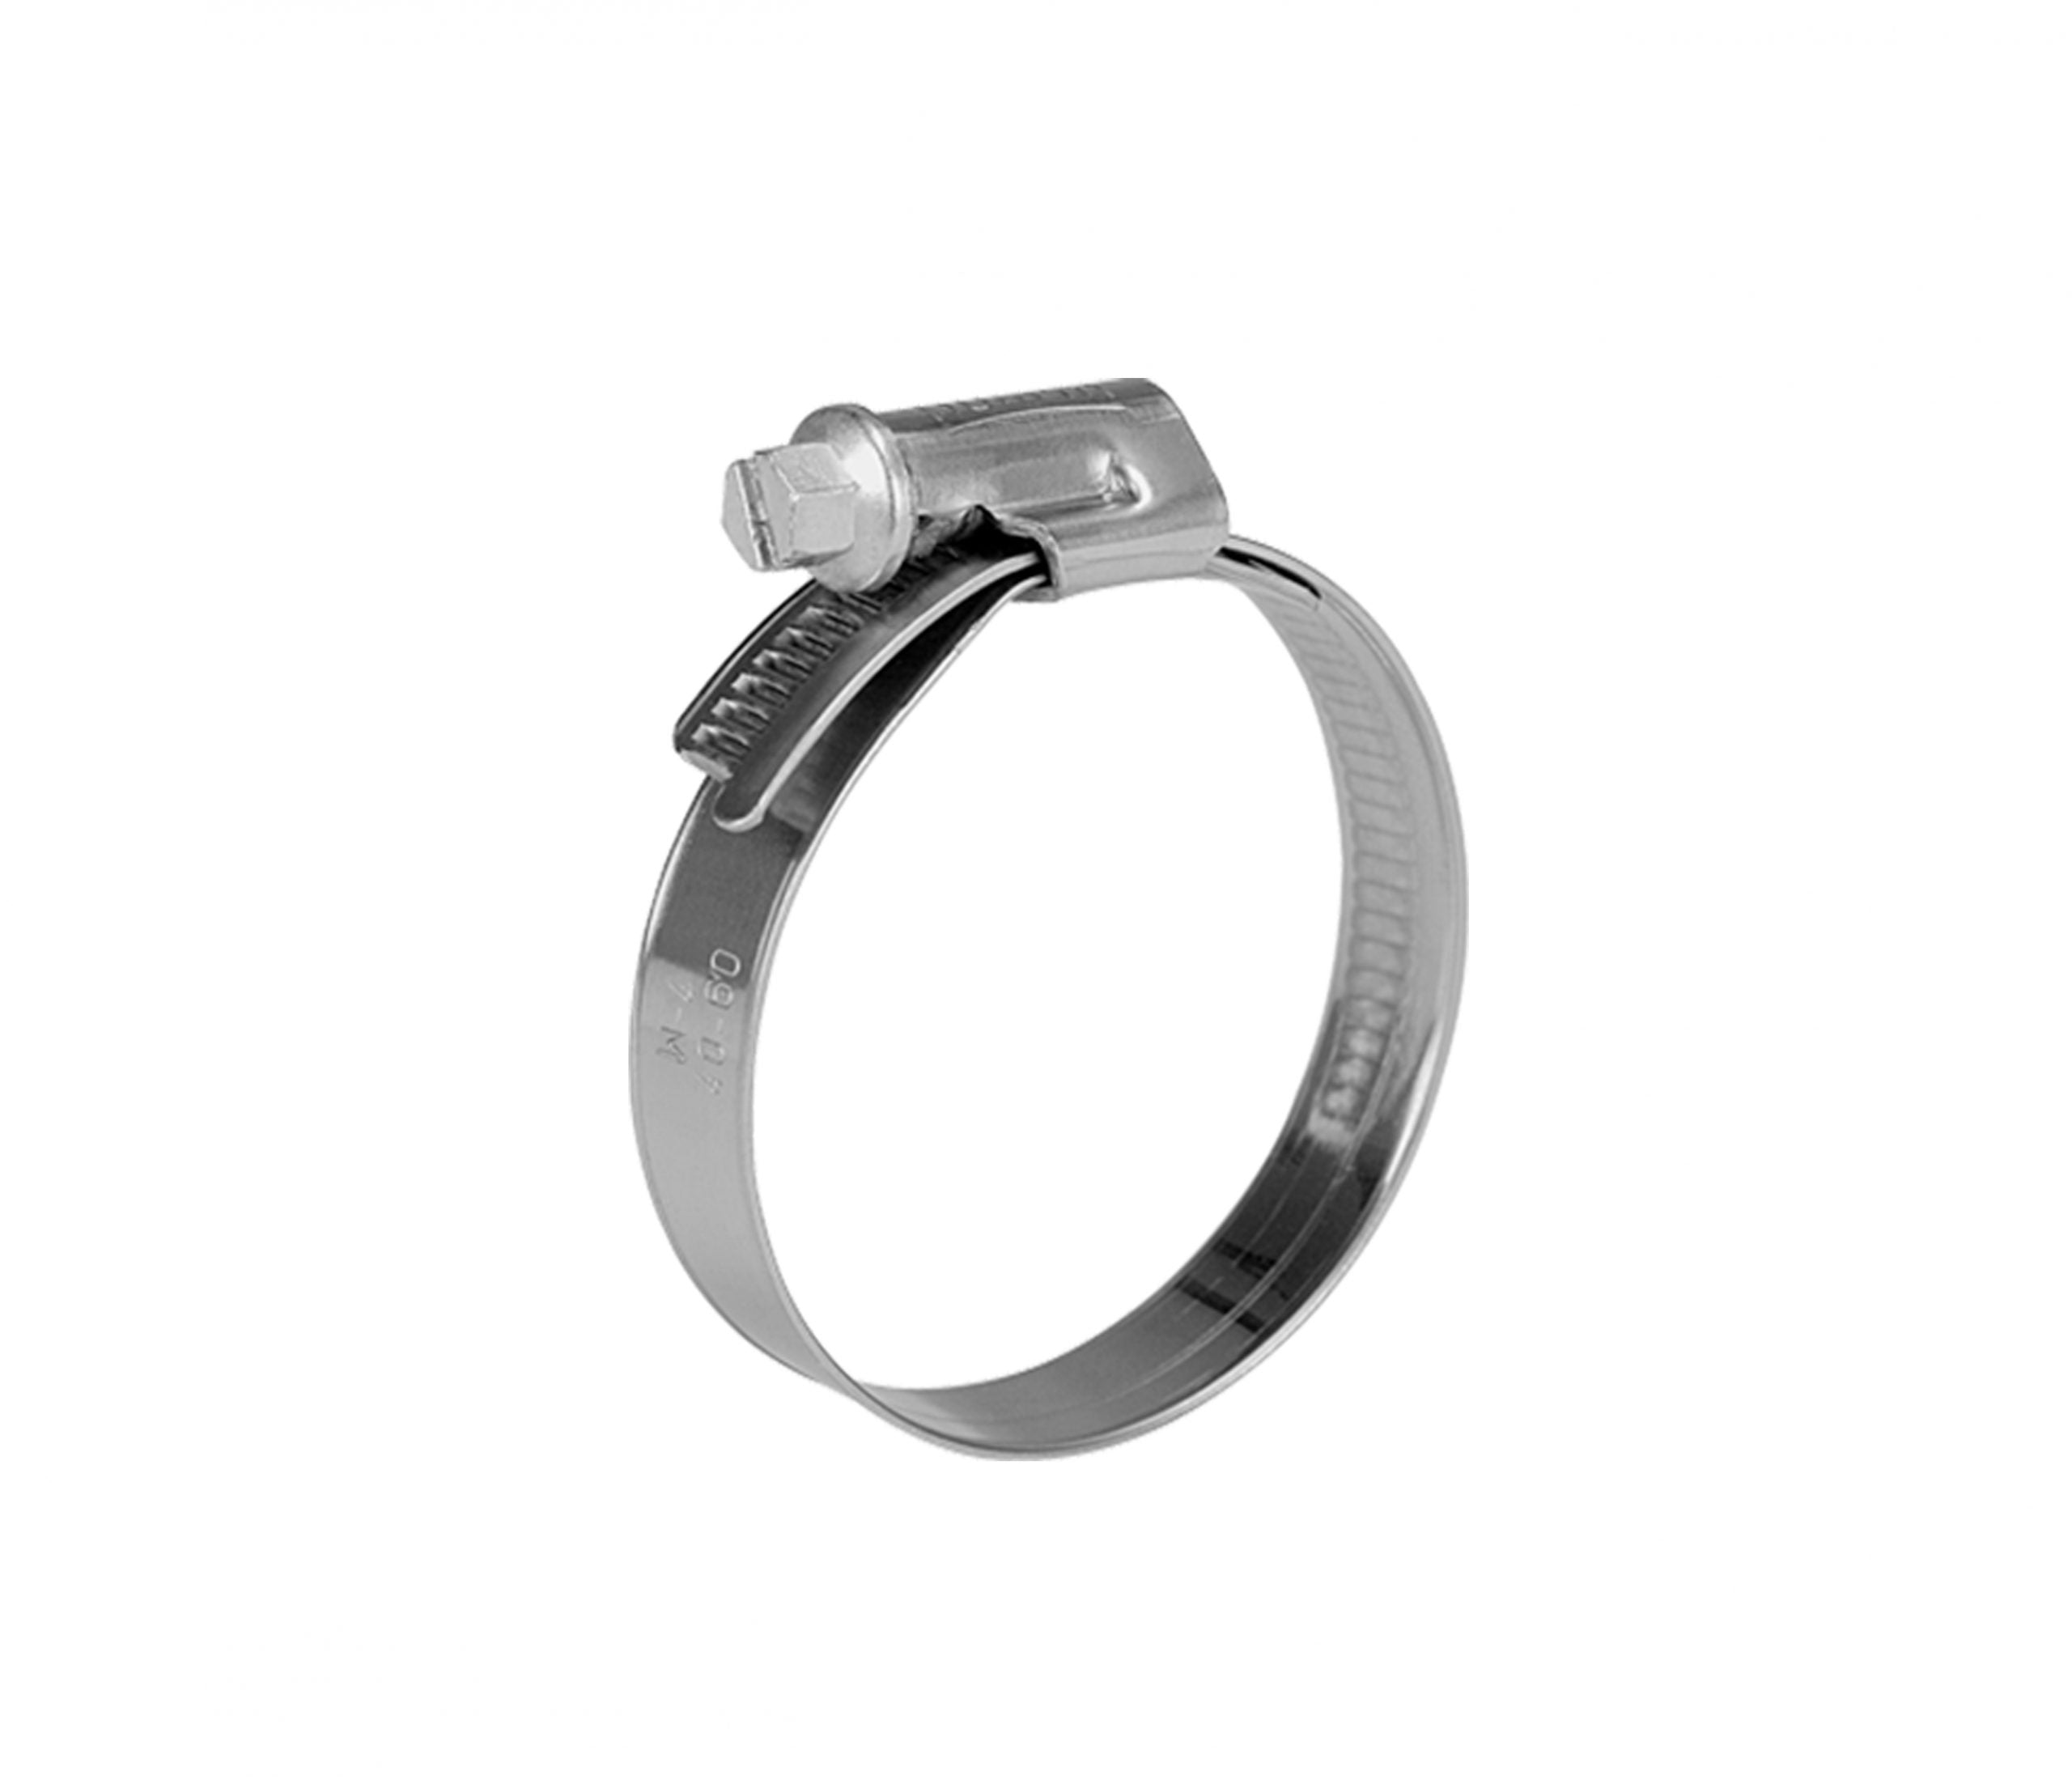 40-60mm Stainless Steel Hose Clamp with Worm Drive 722-4060 by Norma